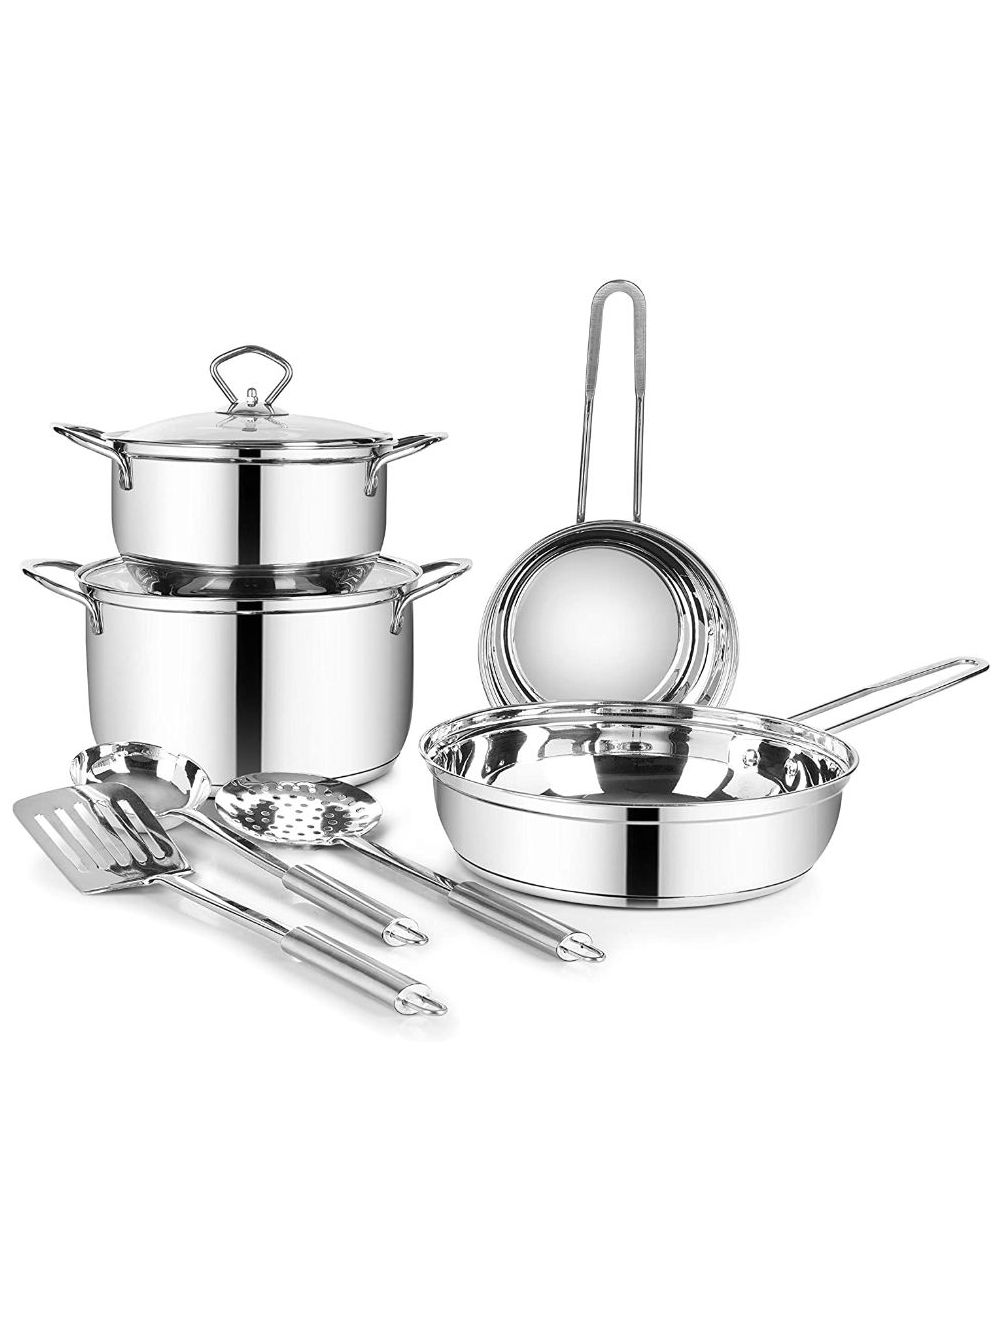 Classic Essentials Supreme Stainless Steel Cookware Set Silver 9-Pieces-CE-SV09